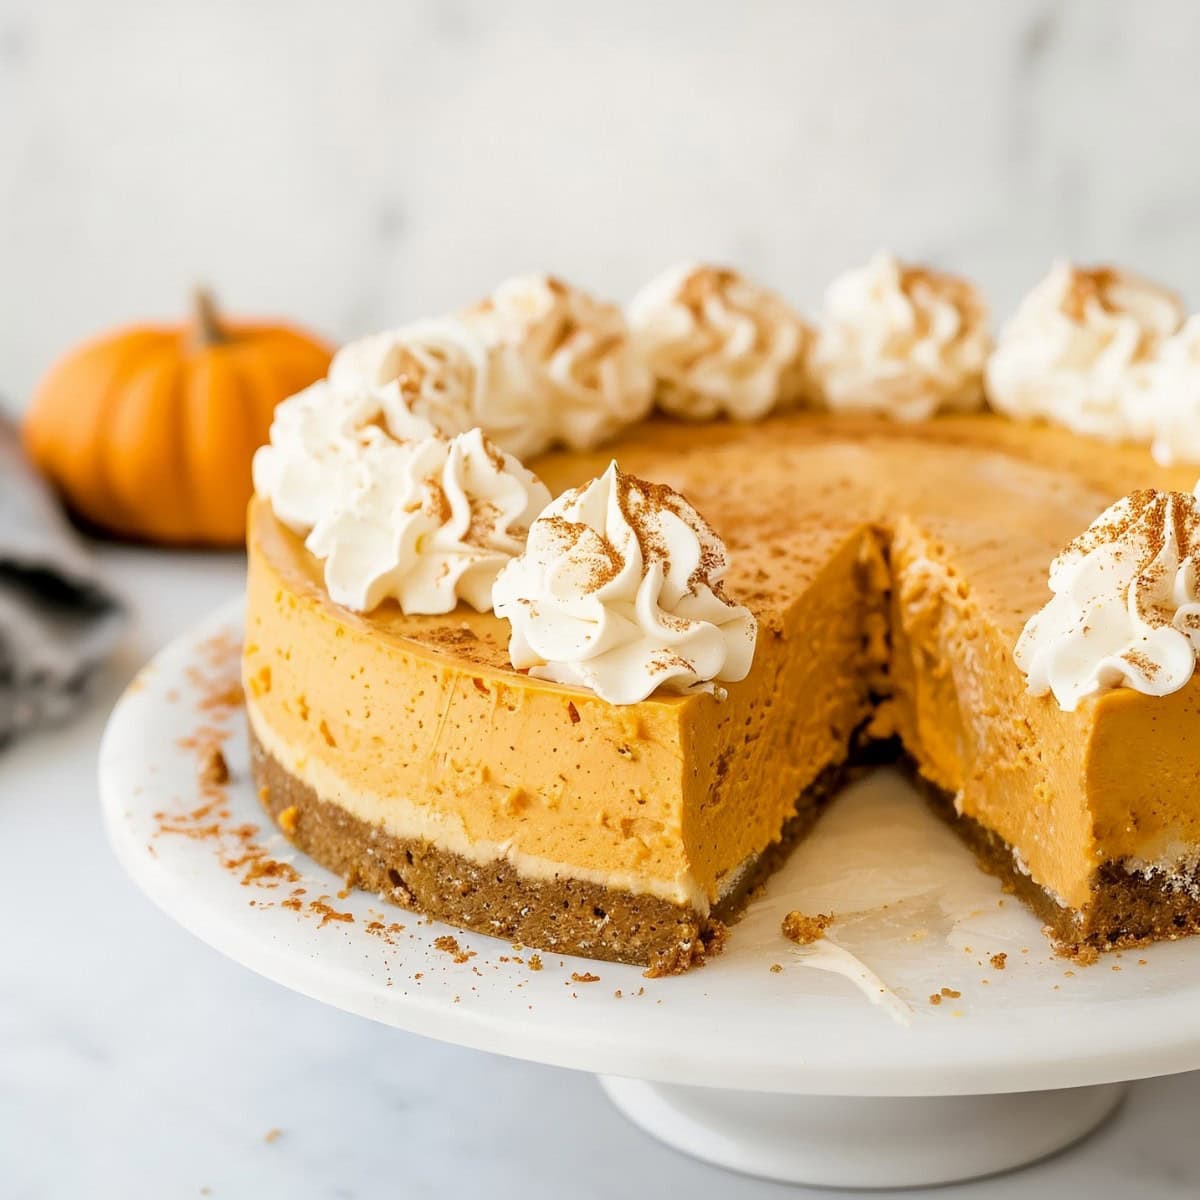 Heavenly no-bake pumpkin cheesecake topped with whipped cream, a festive treat perfect for Thanksgiving or any autumn celebration